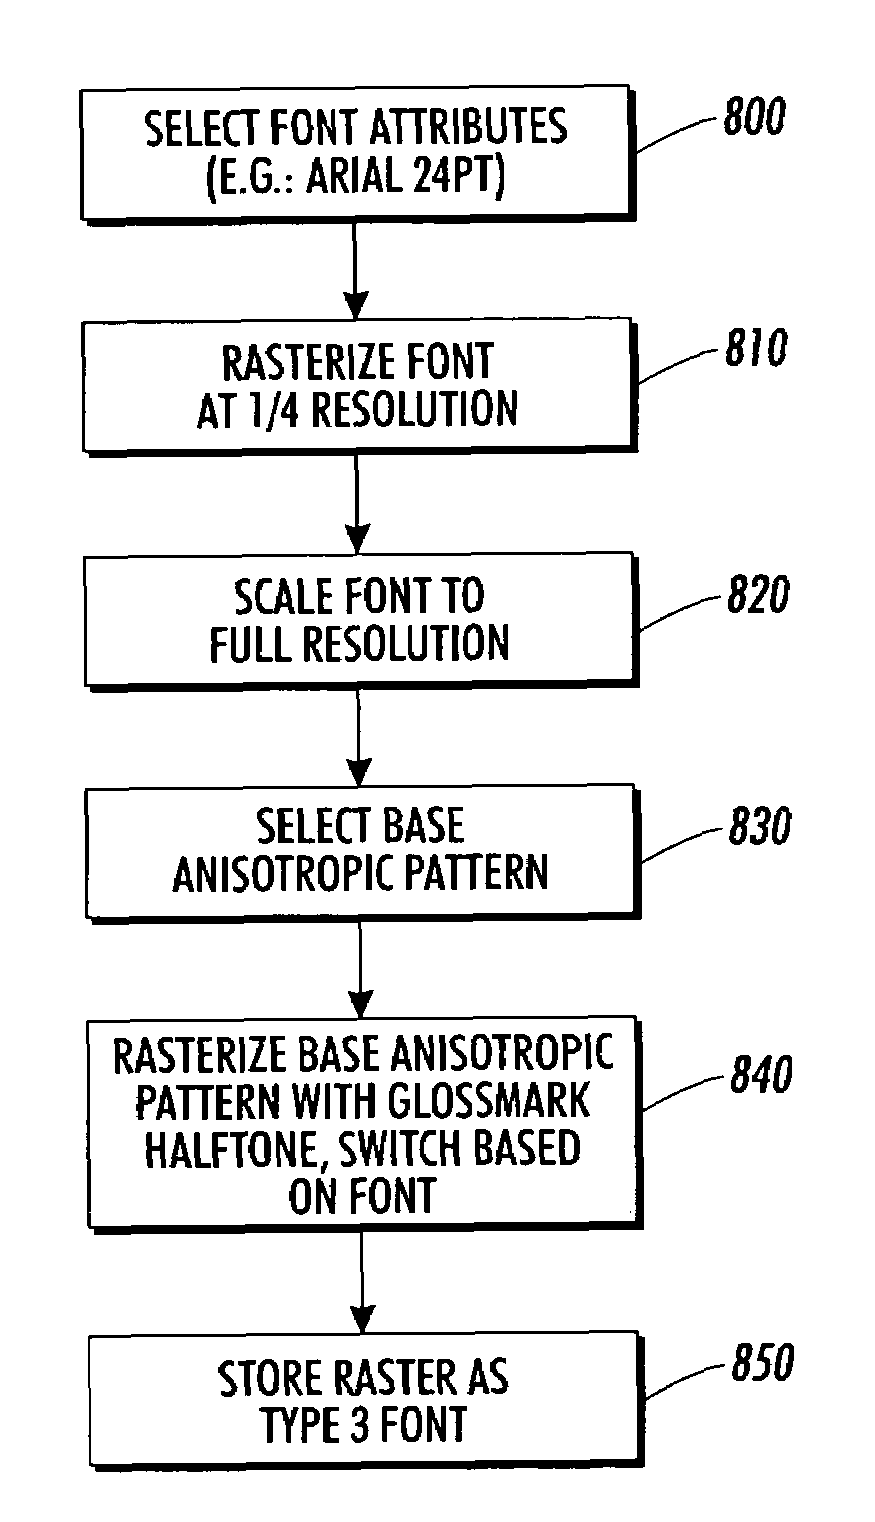 Variable differential gloss font image data